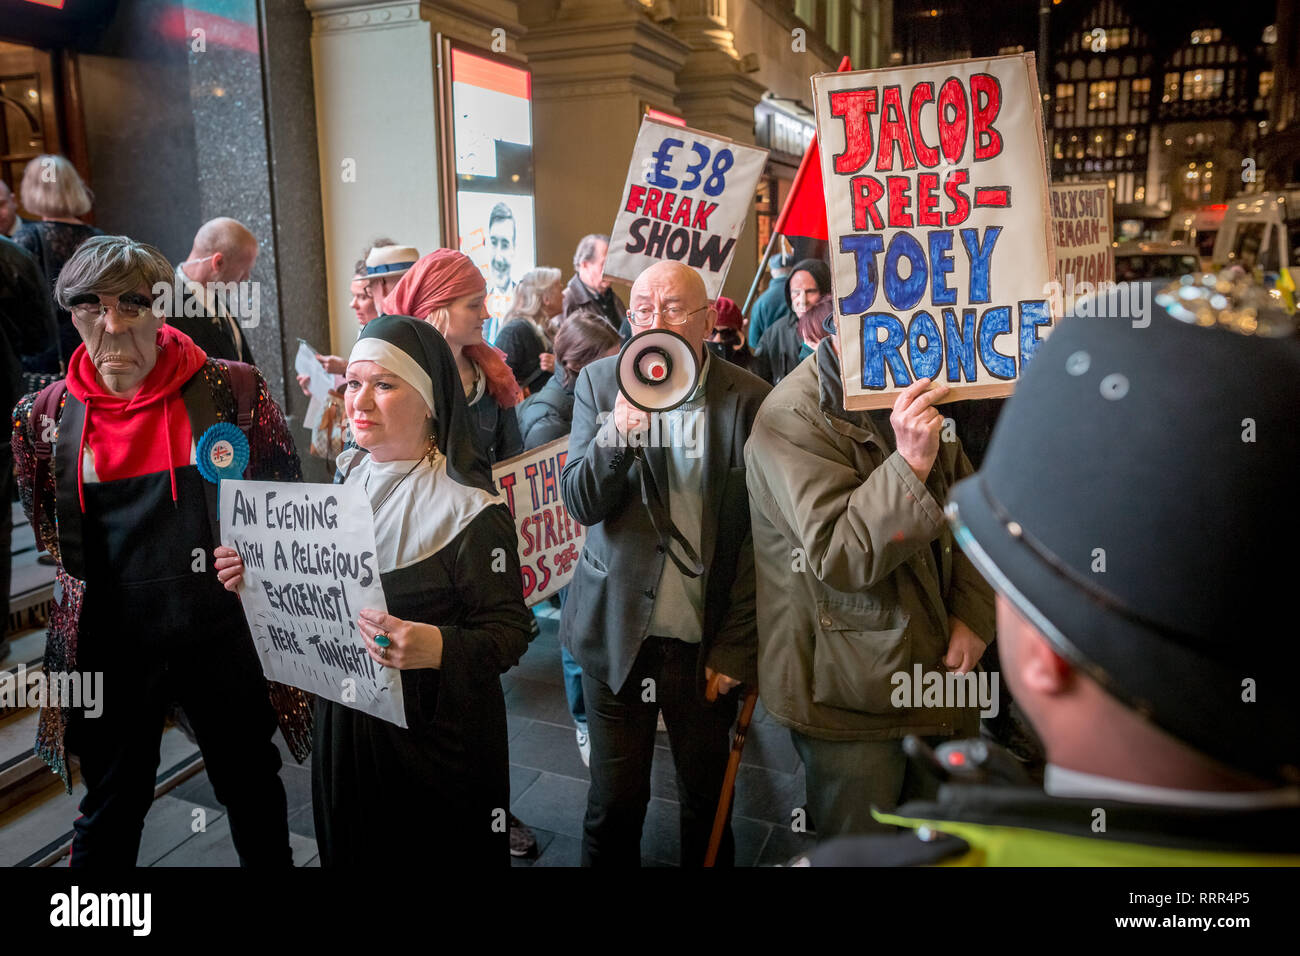 Protesters from Class War anarchist group hold a lively demonstration outside the London Palladium theatre against the evening talk featuring Jacob Rees-Mogg, Conservative MP and prominent Brexit supporter. Class War members, including long-time anarchist, Ian Bone (with megaphone), Jane Nicholl (dressed as a nun) and Adam Clifford (as Rees-Mogg parody) claim Mr Rees-Mogg, a Catholic, is a religious extremist because of his outspoken views on abortion. Stock Photo